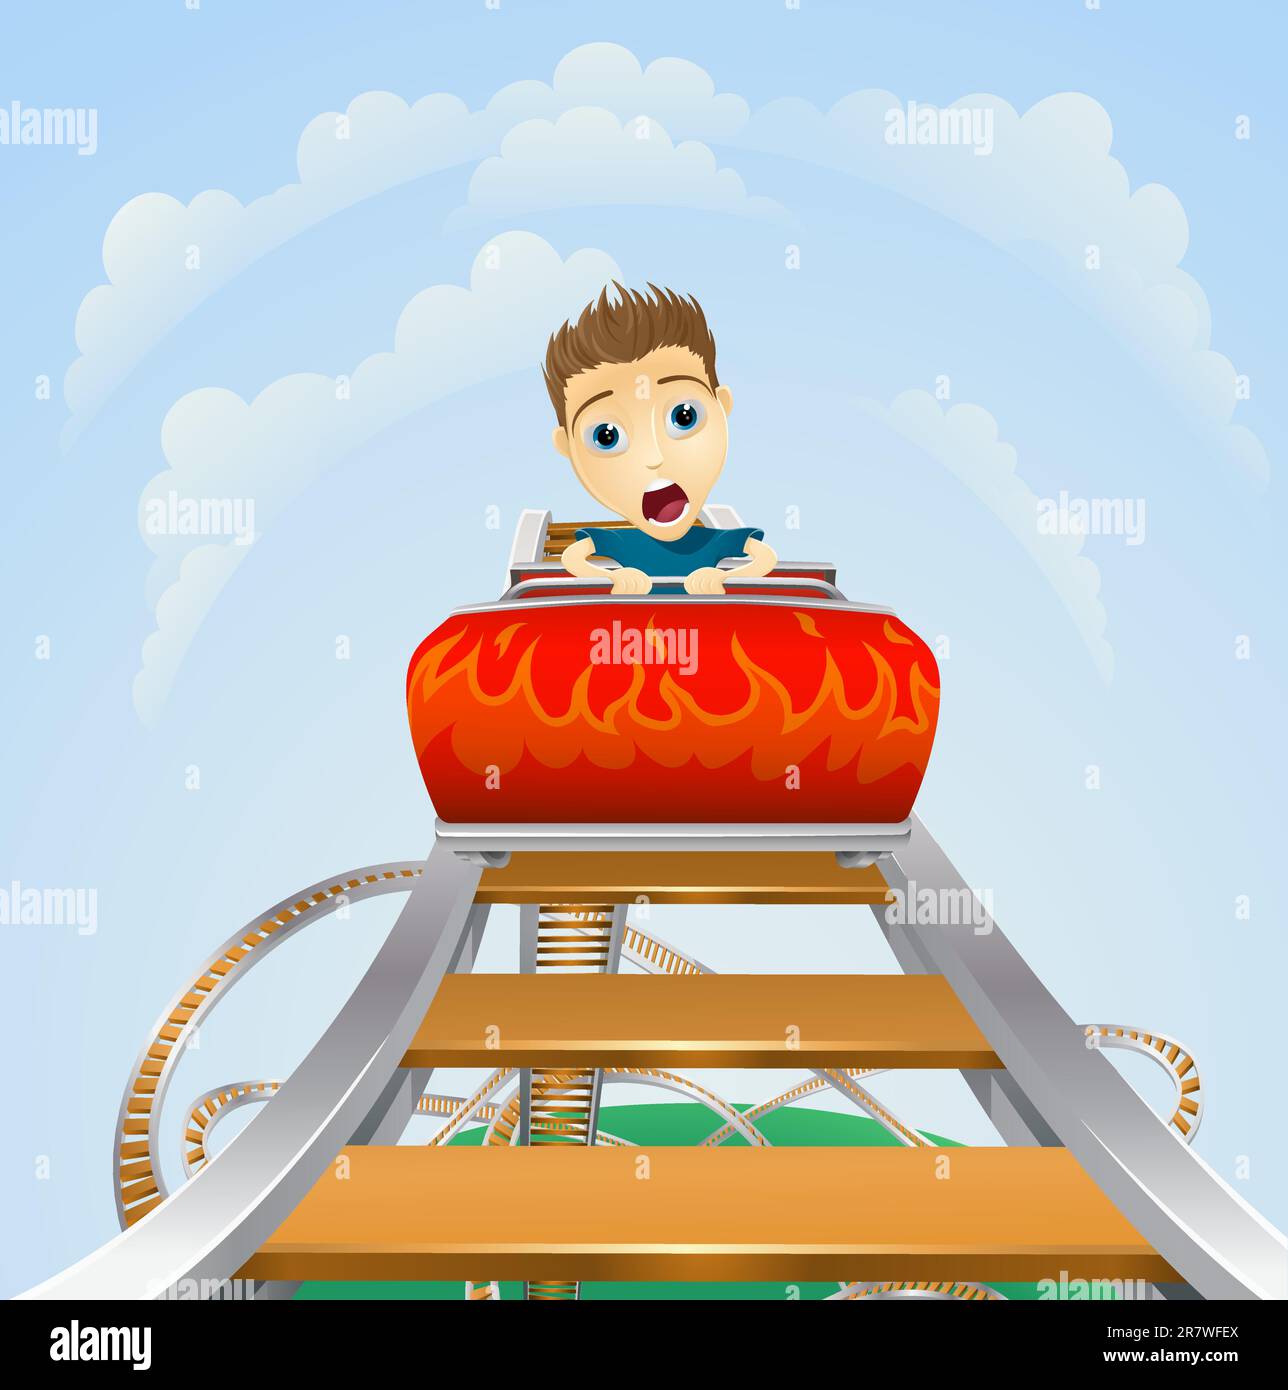 Cartoon of a young boy or man looking terrified on a roller coaster ride Stock Vector